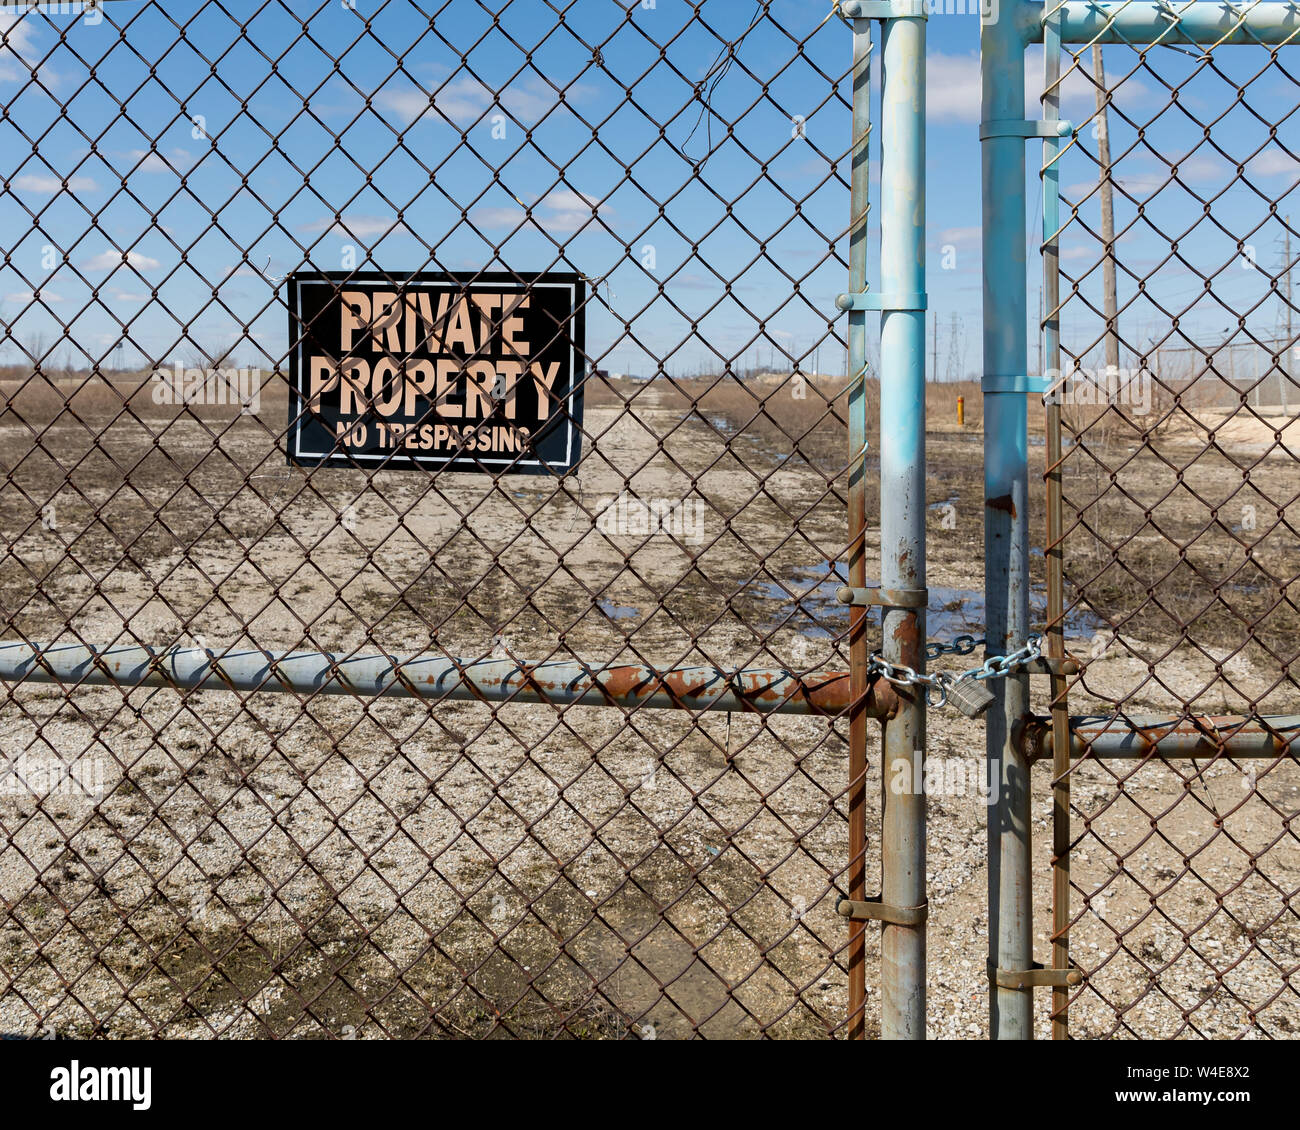 Chain link fence gates chained and locked with no trespassing, private property sign at the site of an abandoned and razed factory Stock Photo